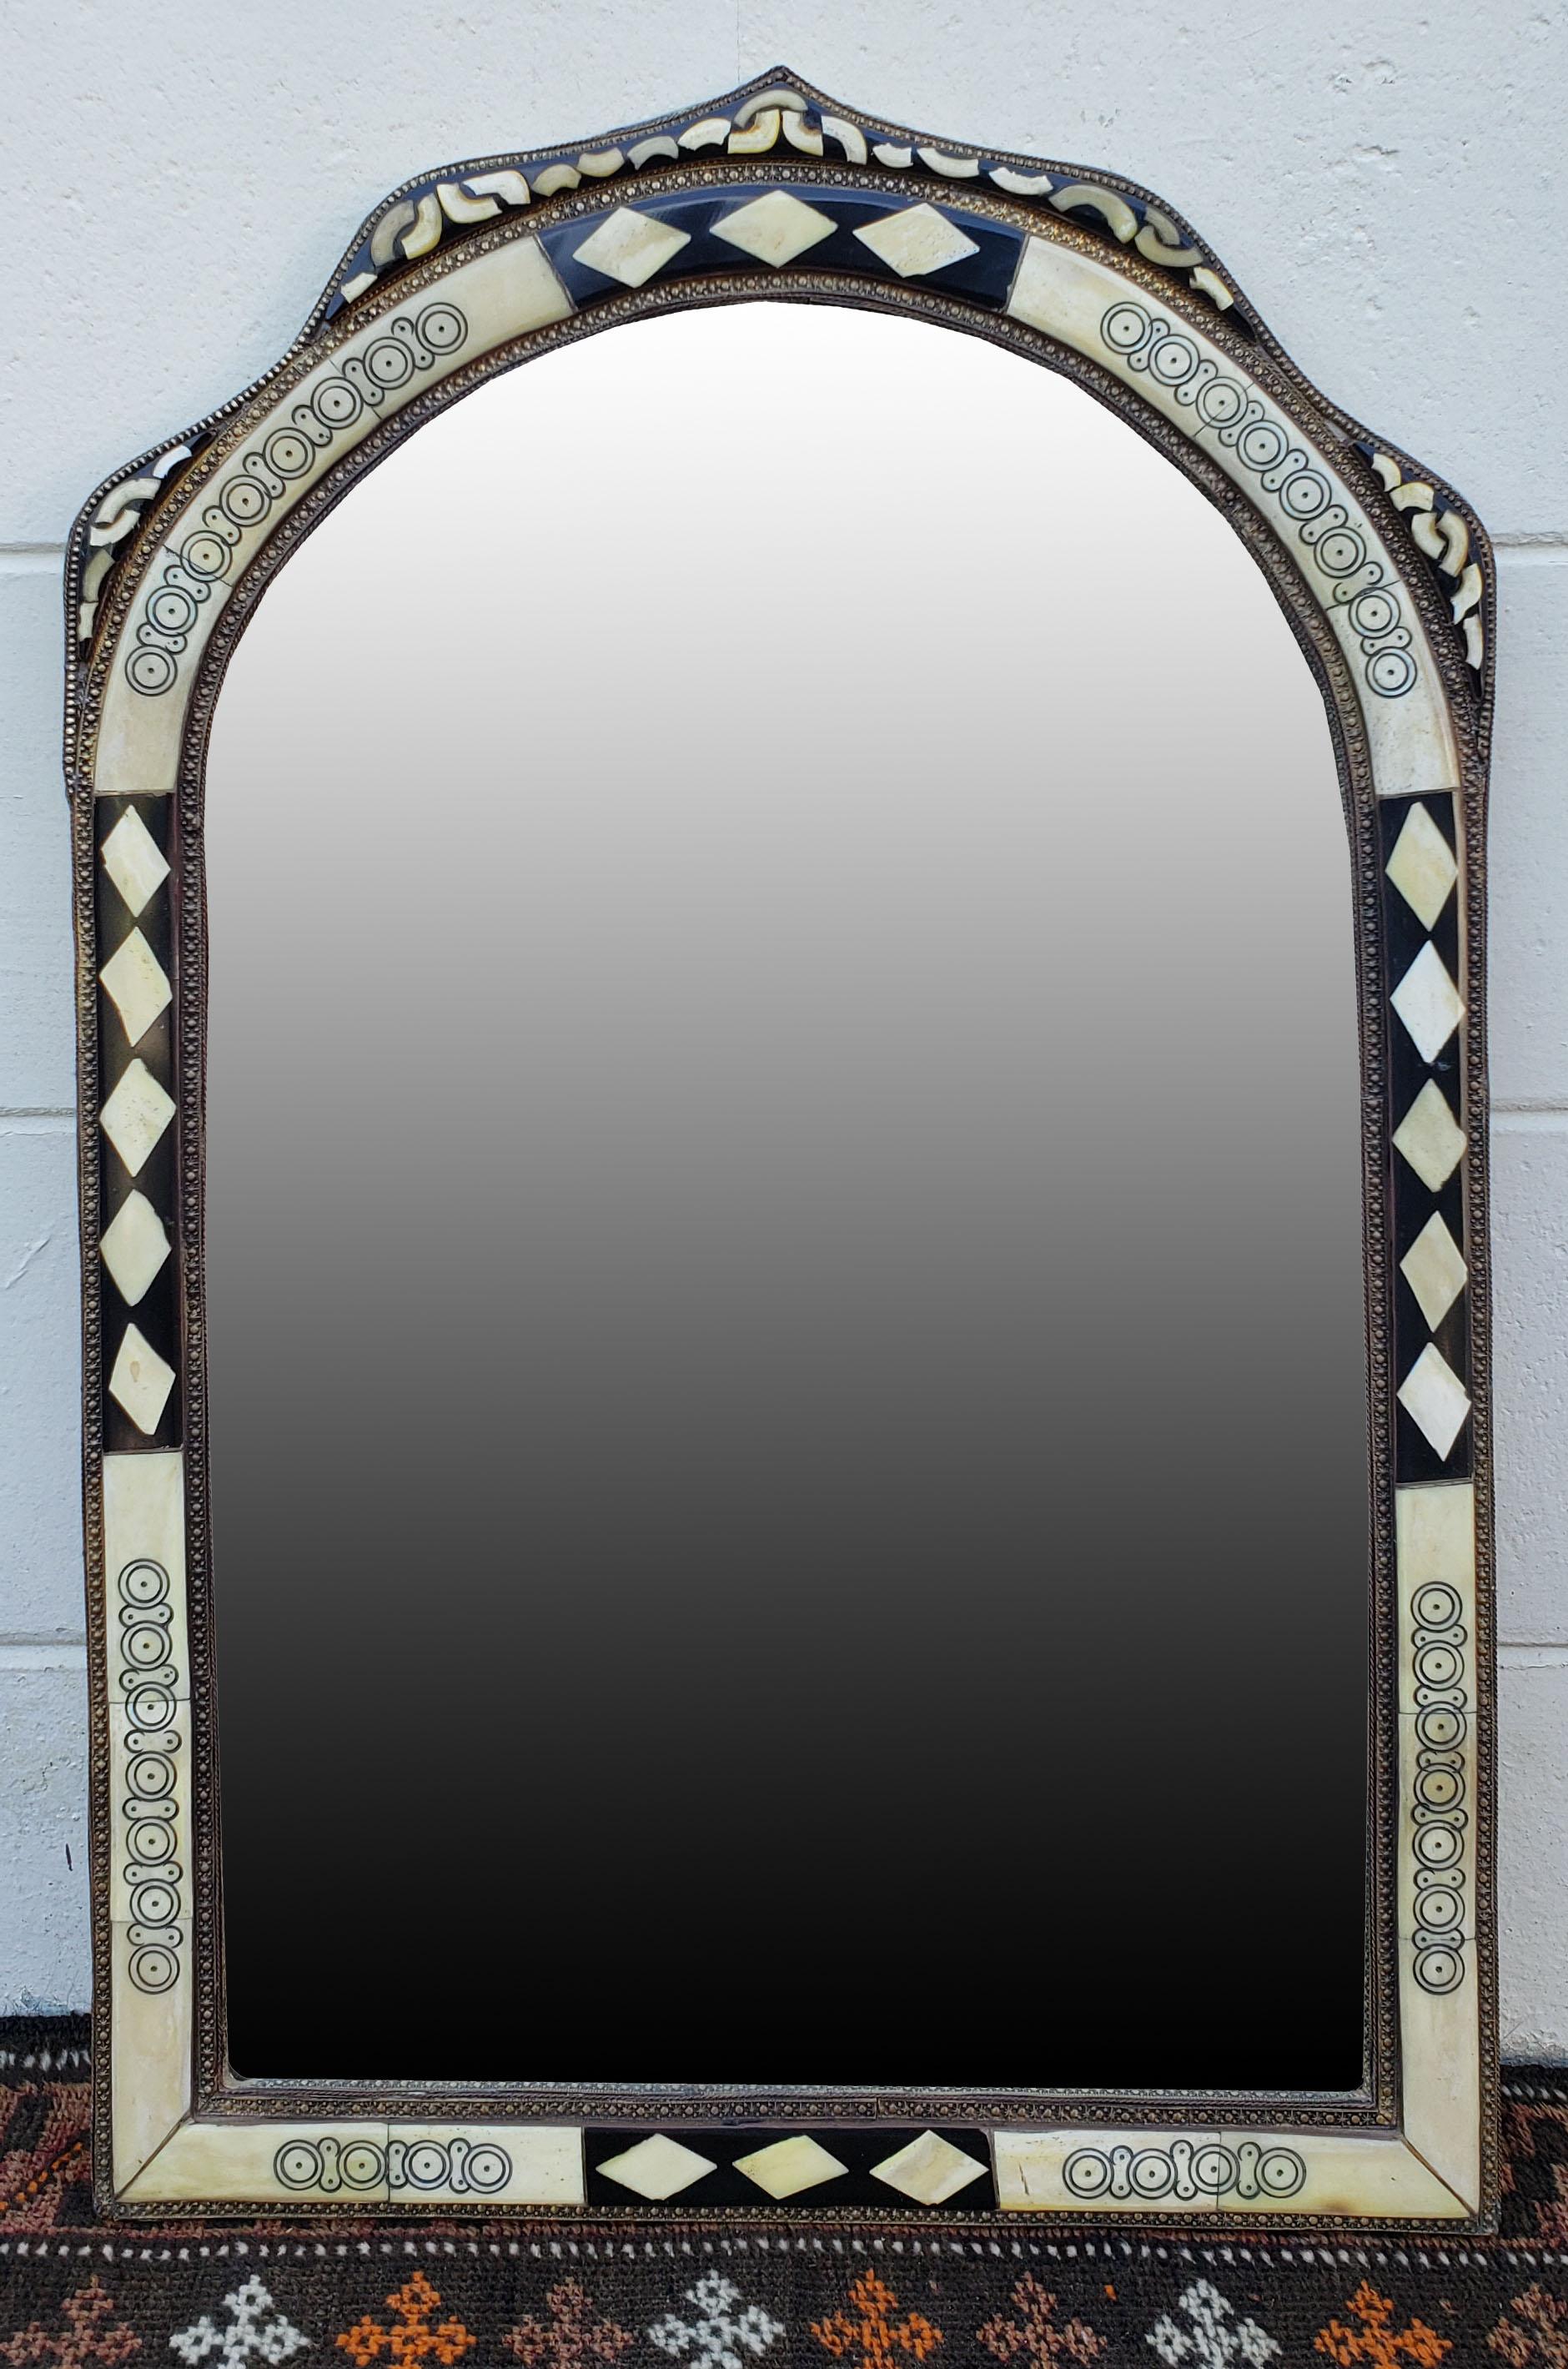 Medium size metal and camel bone inlay Moroccan mirror. Made in the city of Marrakech. Rectangular shape with a arched top, and measuring approximately 29